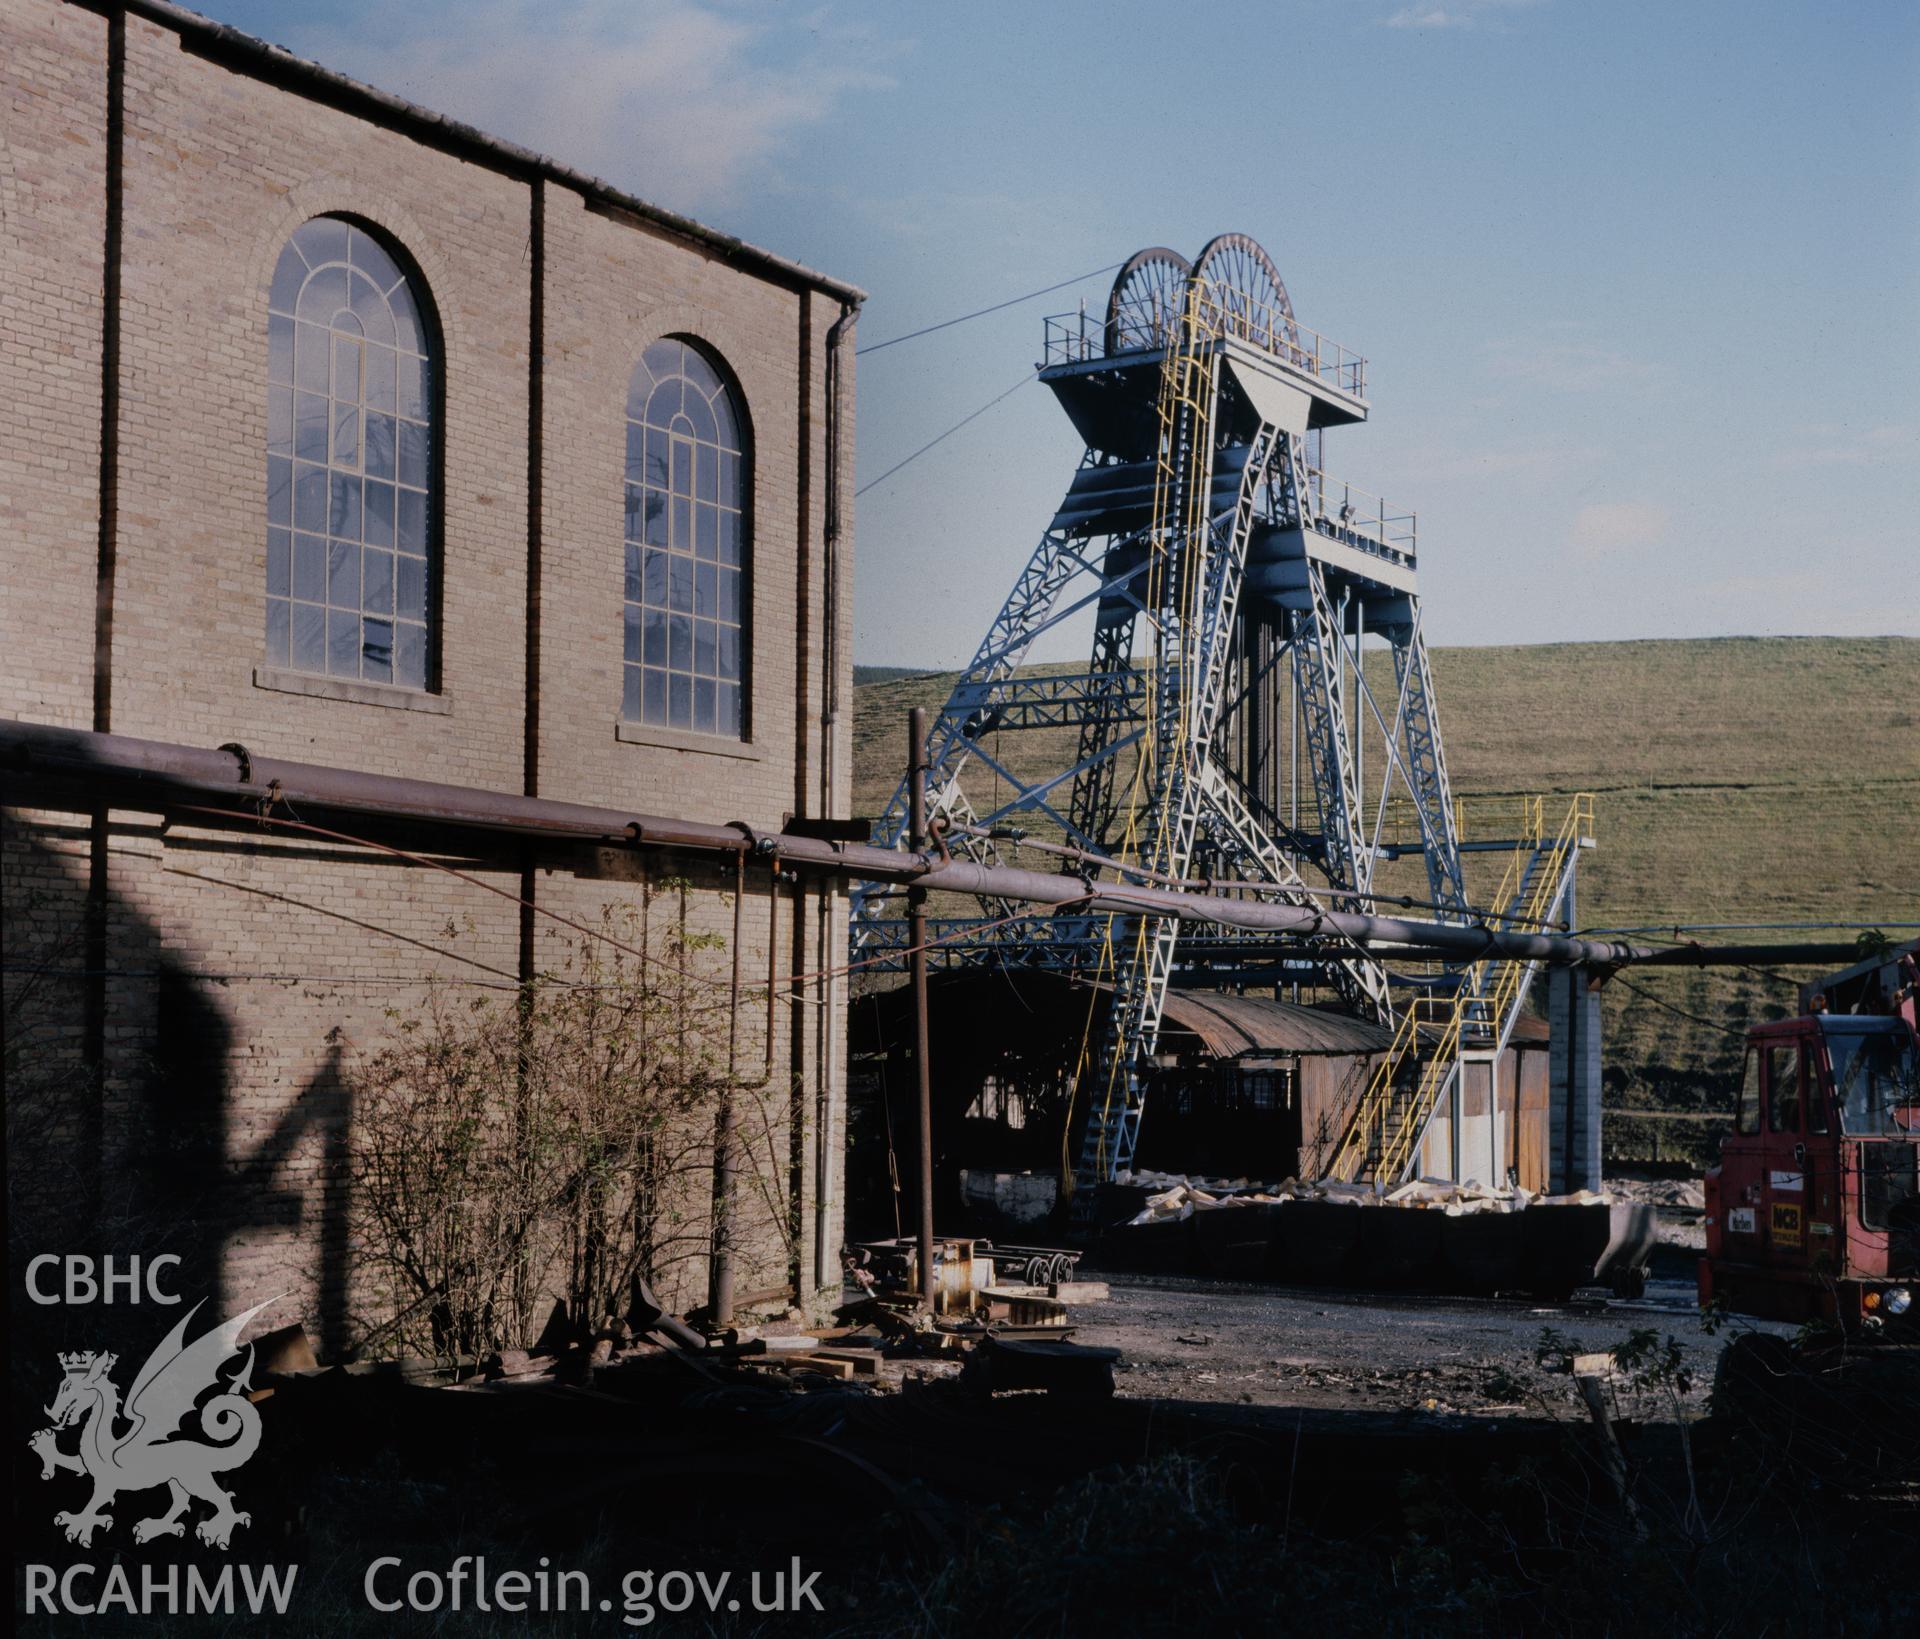 Digital copy of an acetate negative showing surface buildings and pit wheels at St John's Colliery, Maesteg dated 1984, from the John Cornwell Collection.